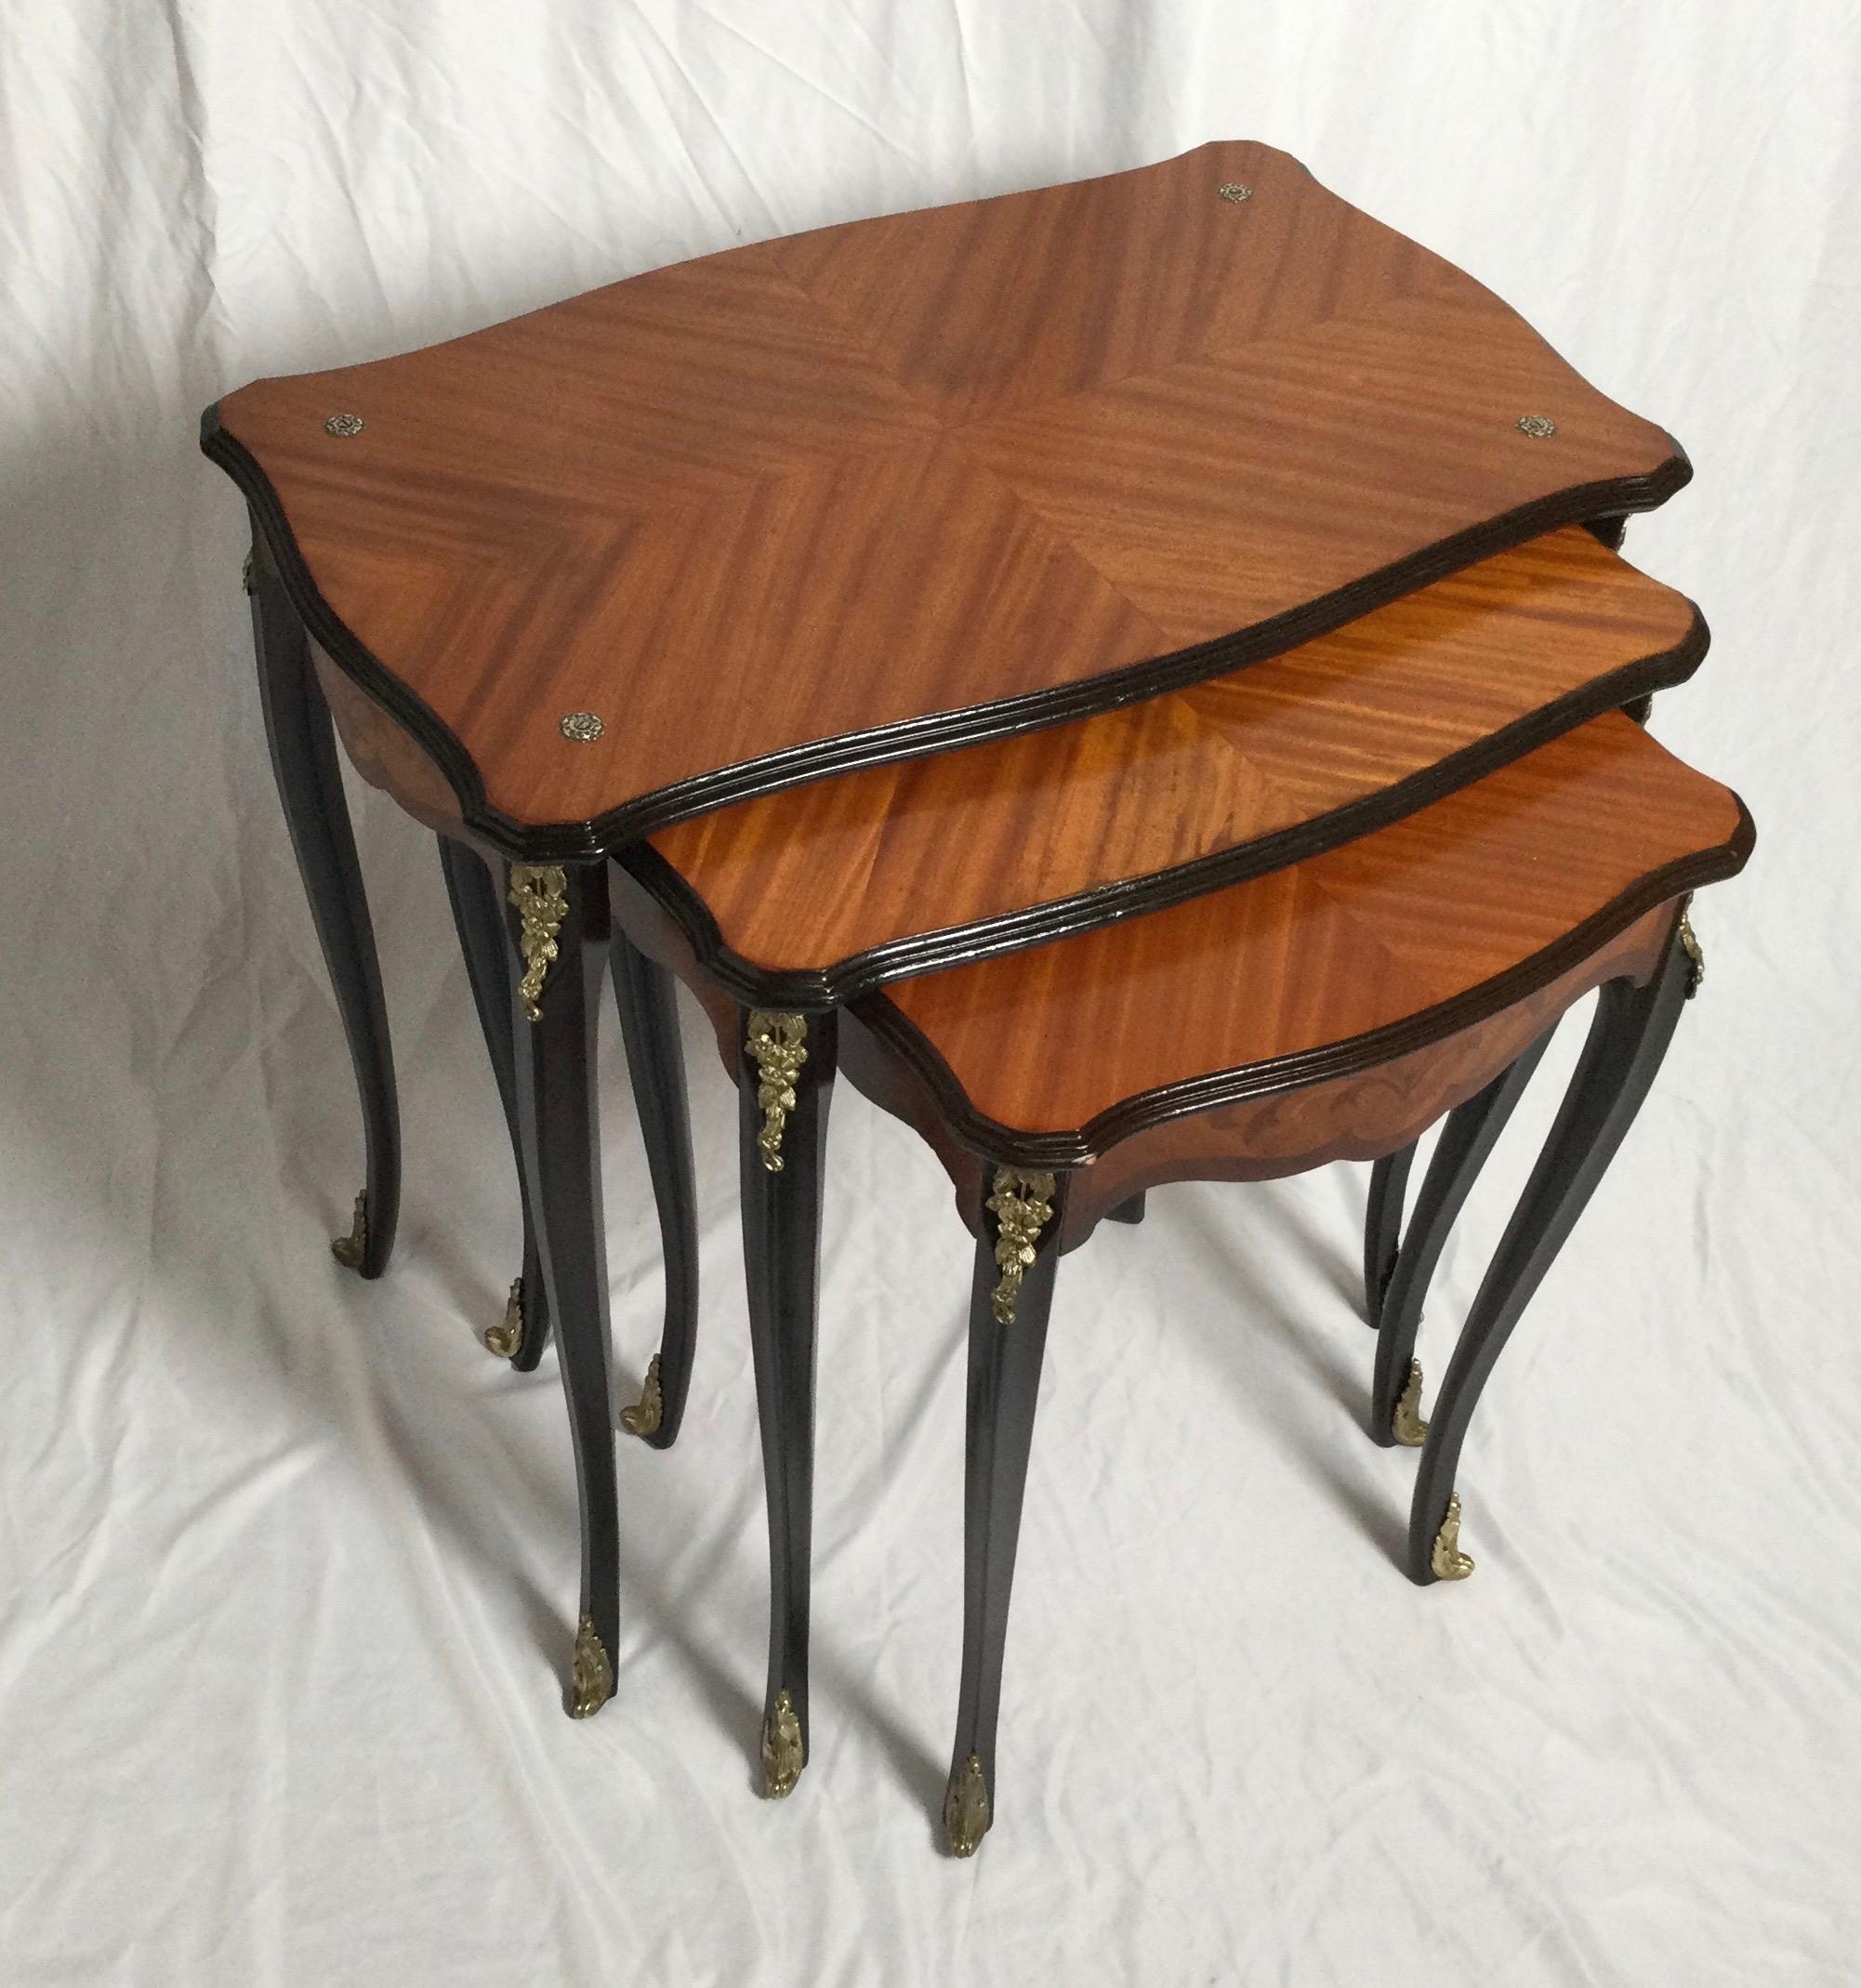 A graceful set of three book matched top nesting tables with dark mahogany legs and trim. There are cast burnished brass mounts at the top, and on the legs, Early to mid-20th century.